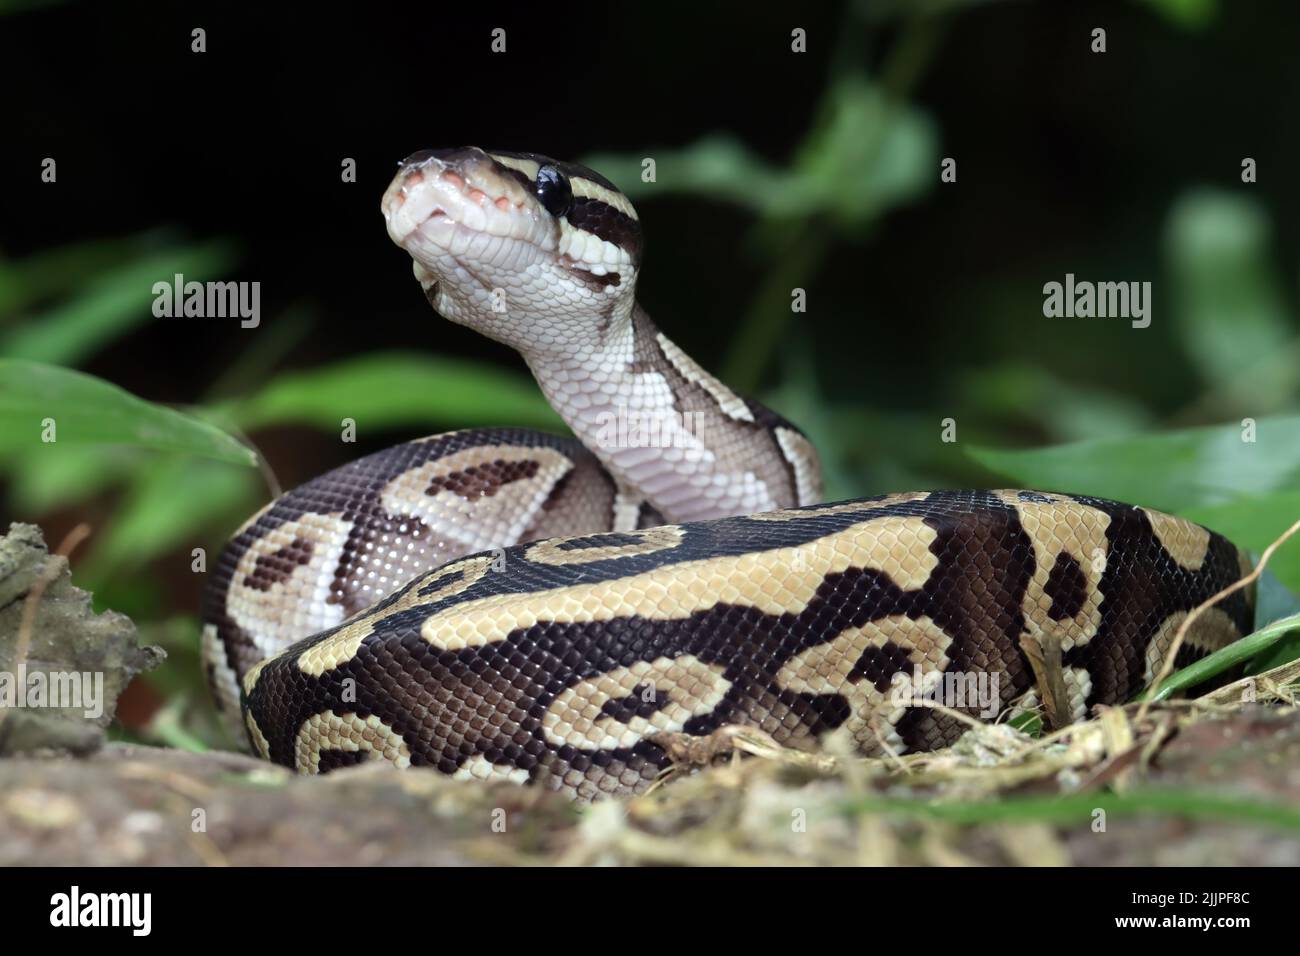 Close-up of a ball python curled up, Indonesia Stock Photo